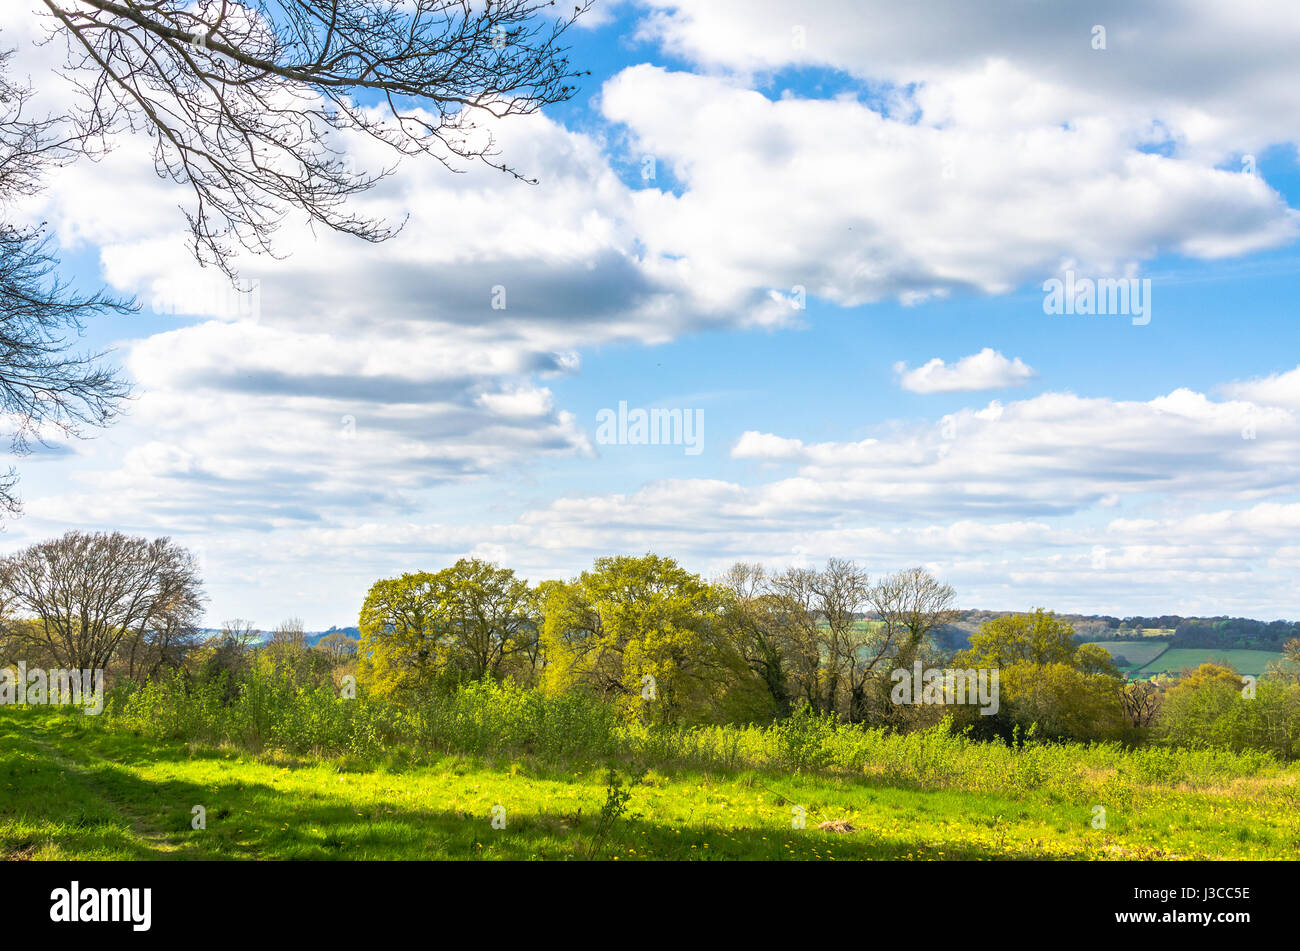 Shoots of spring as nature comes to life in the English Countryside, Sevenoaks, Kent Stock Photo